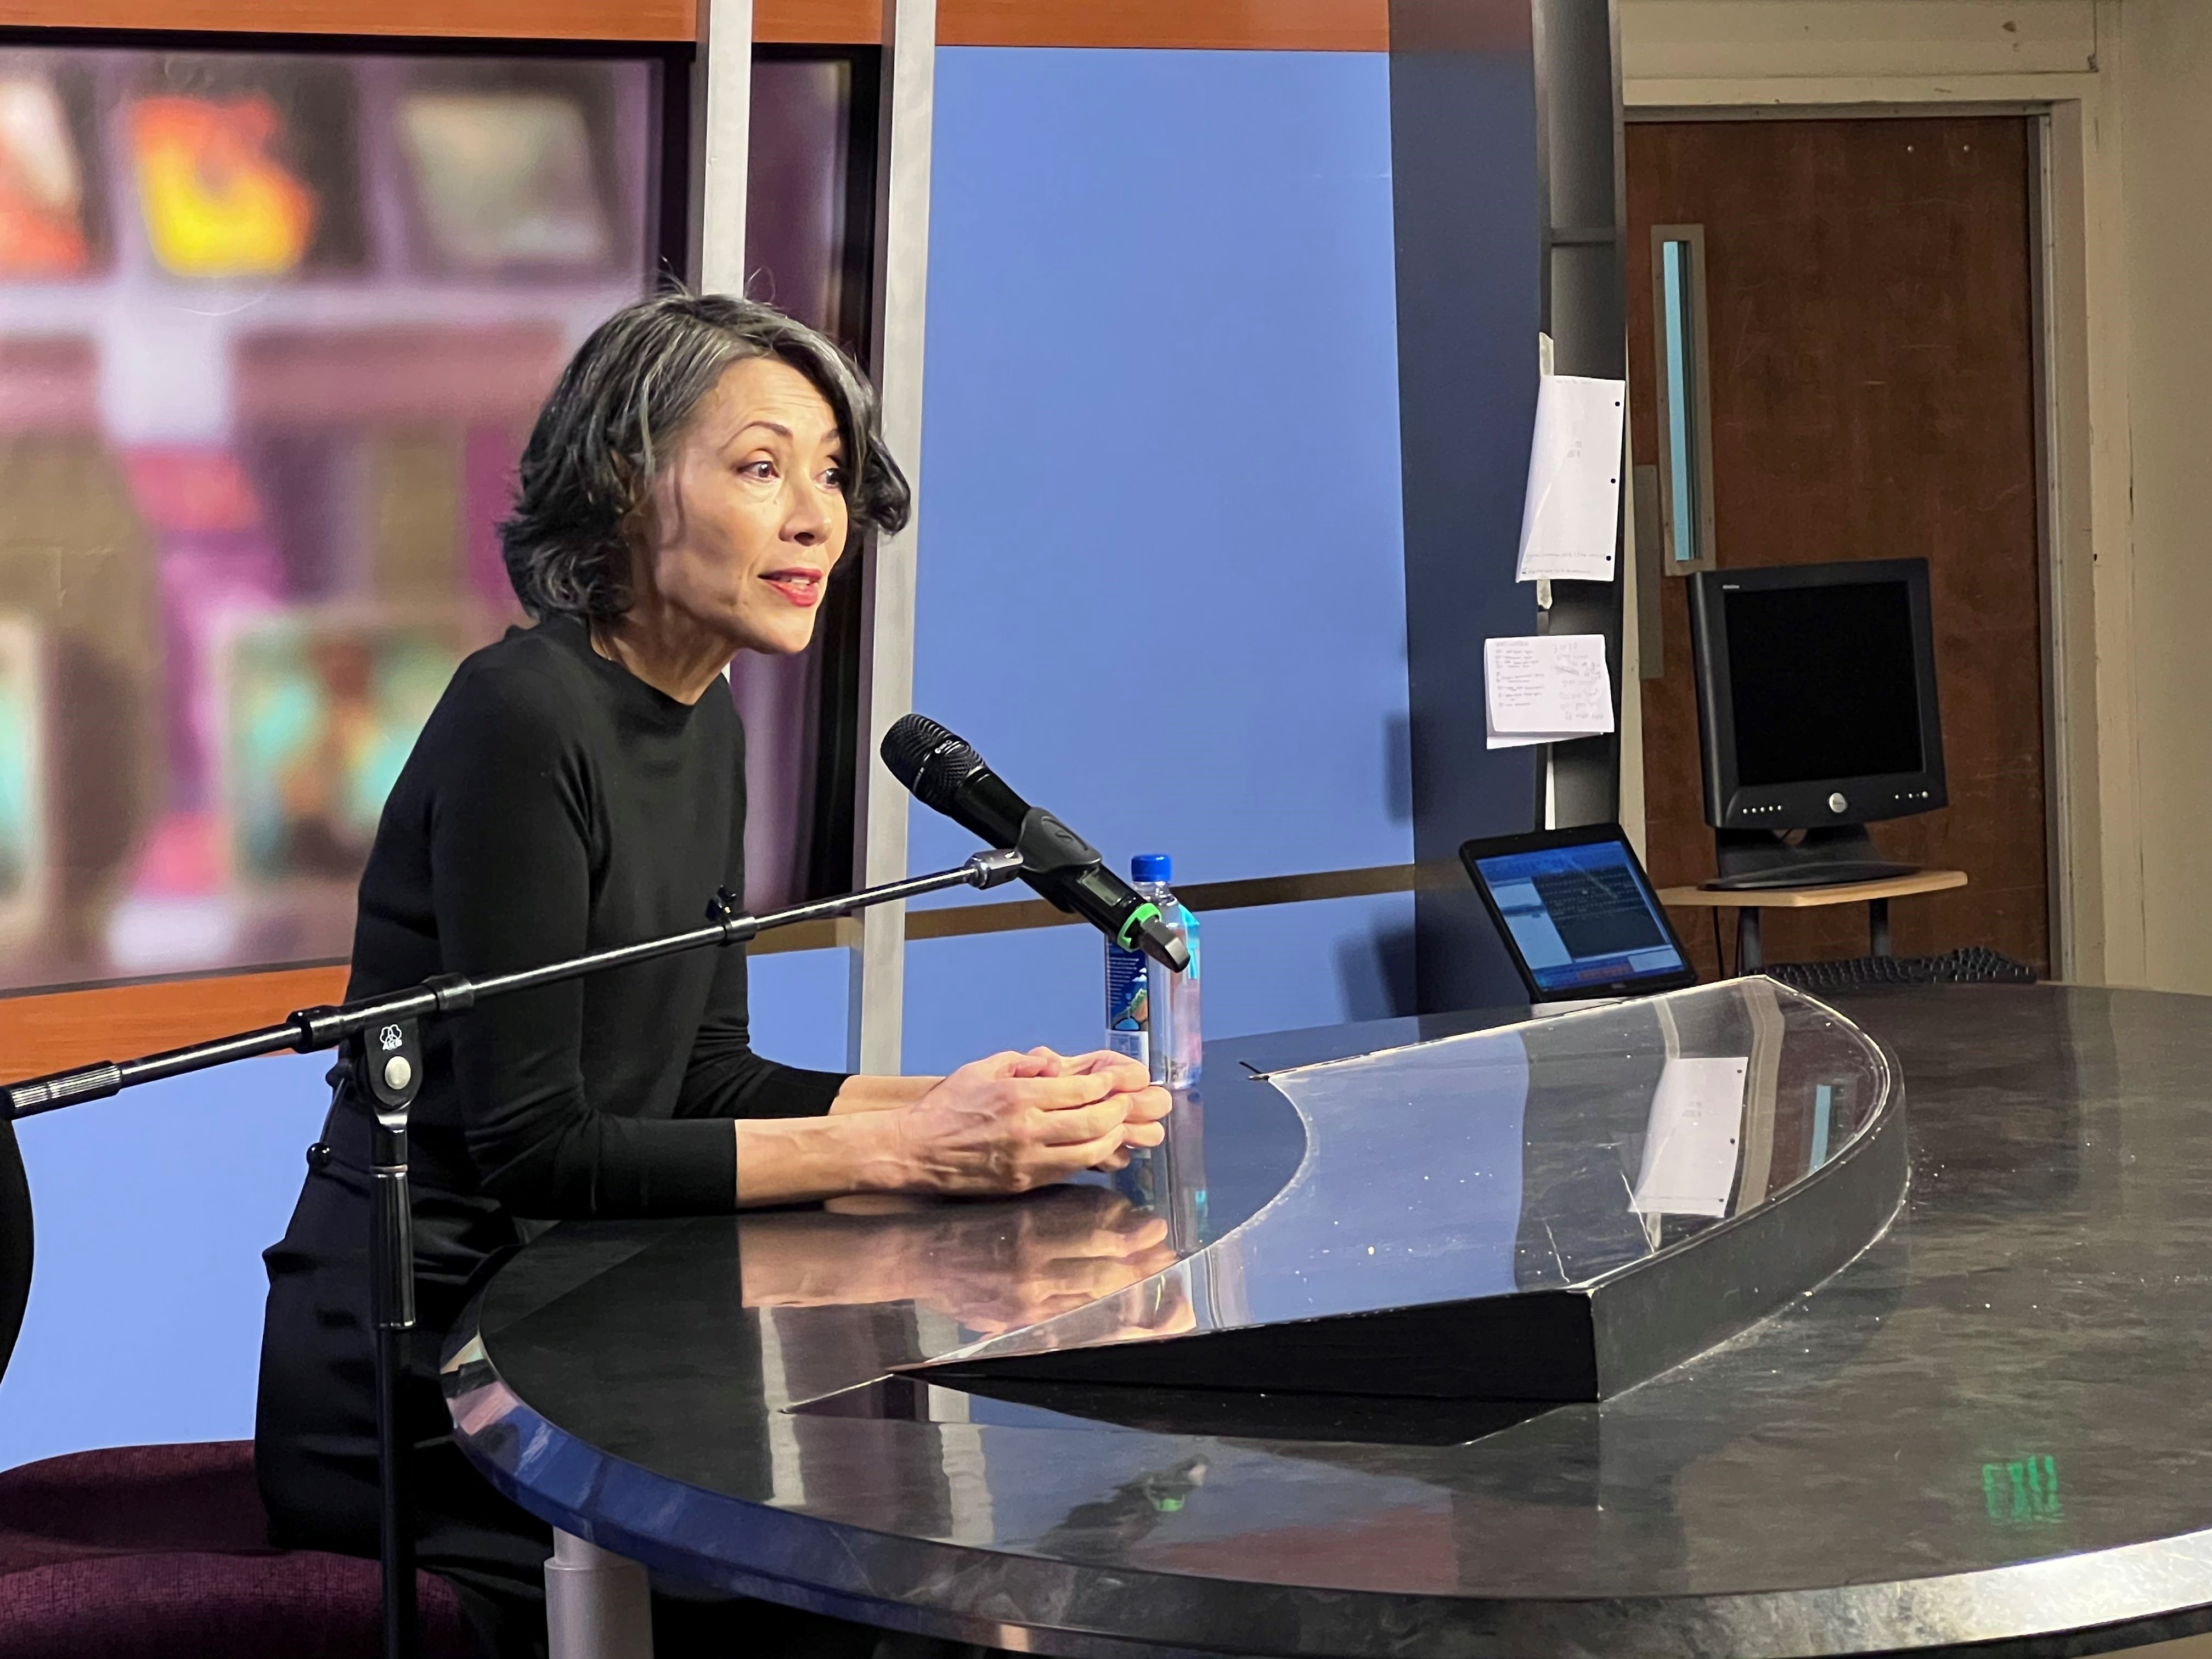 Journalist Ann Curry sitting behind a student anchor desk talking about reporting.